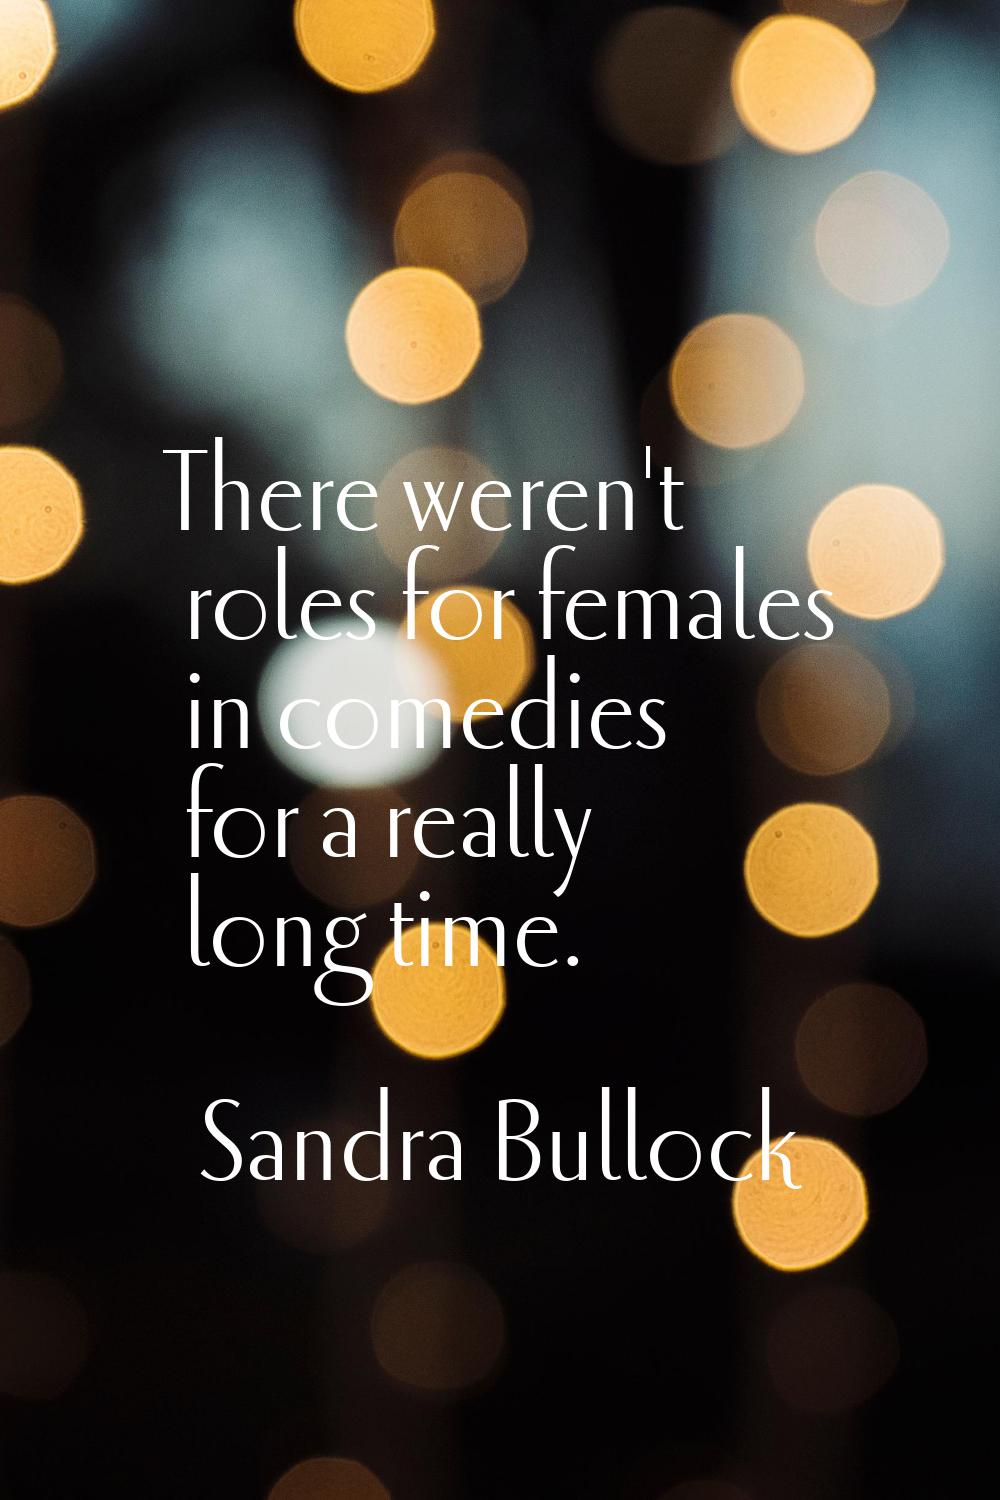 There weren't roles for females in comedies for a really long time.